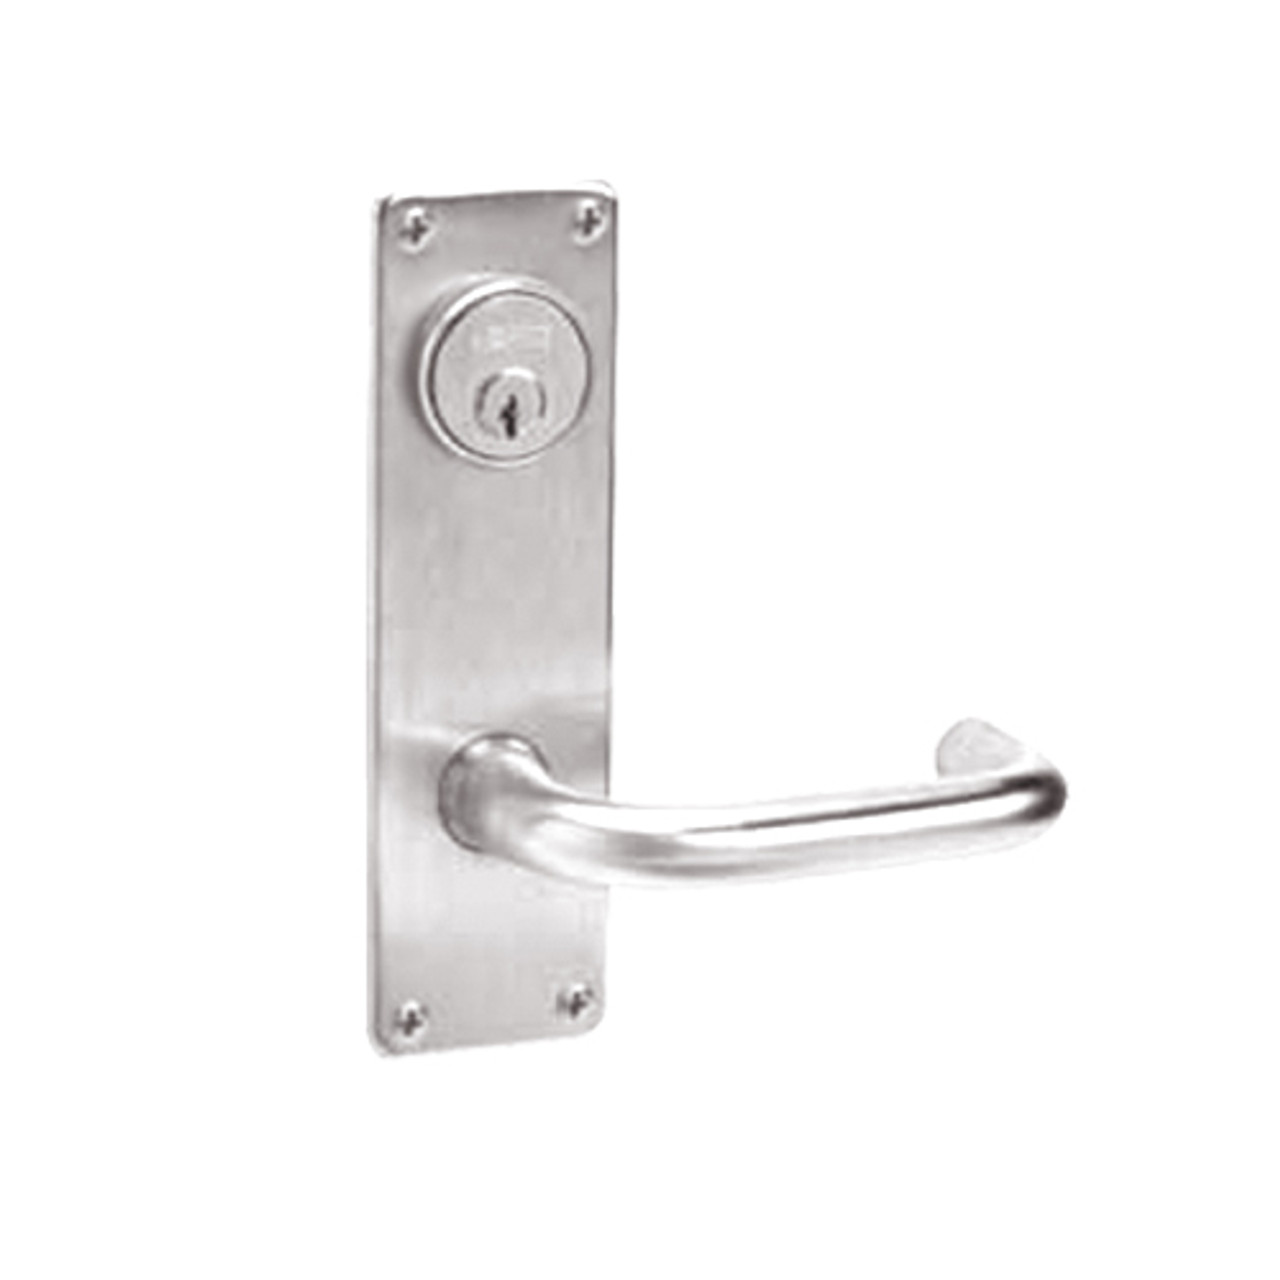 ML2059-LSN-629 Corbin Russwin ML2000 Series Mortise Security Storeroom Locksets with Lustra Lever and Deadbolt in Bright Stainless Steel